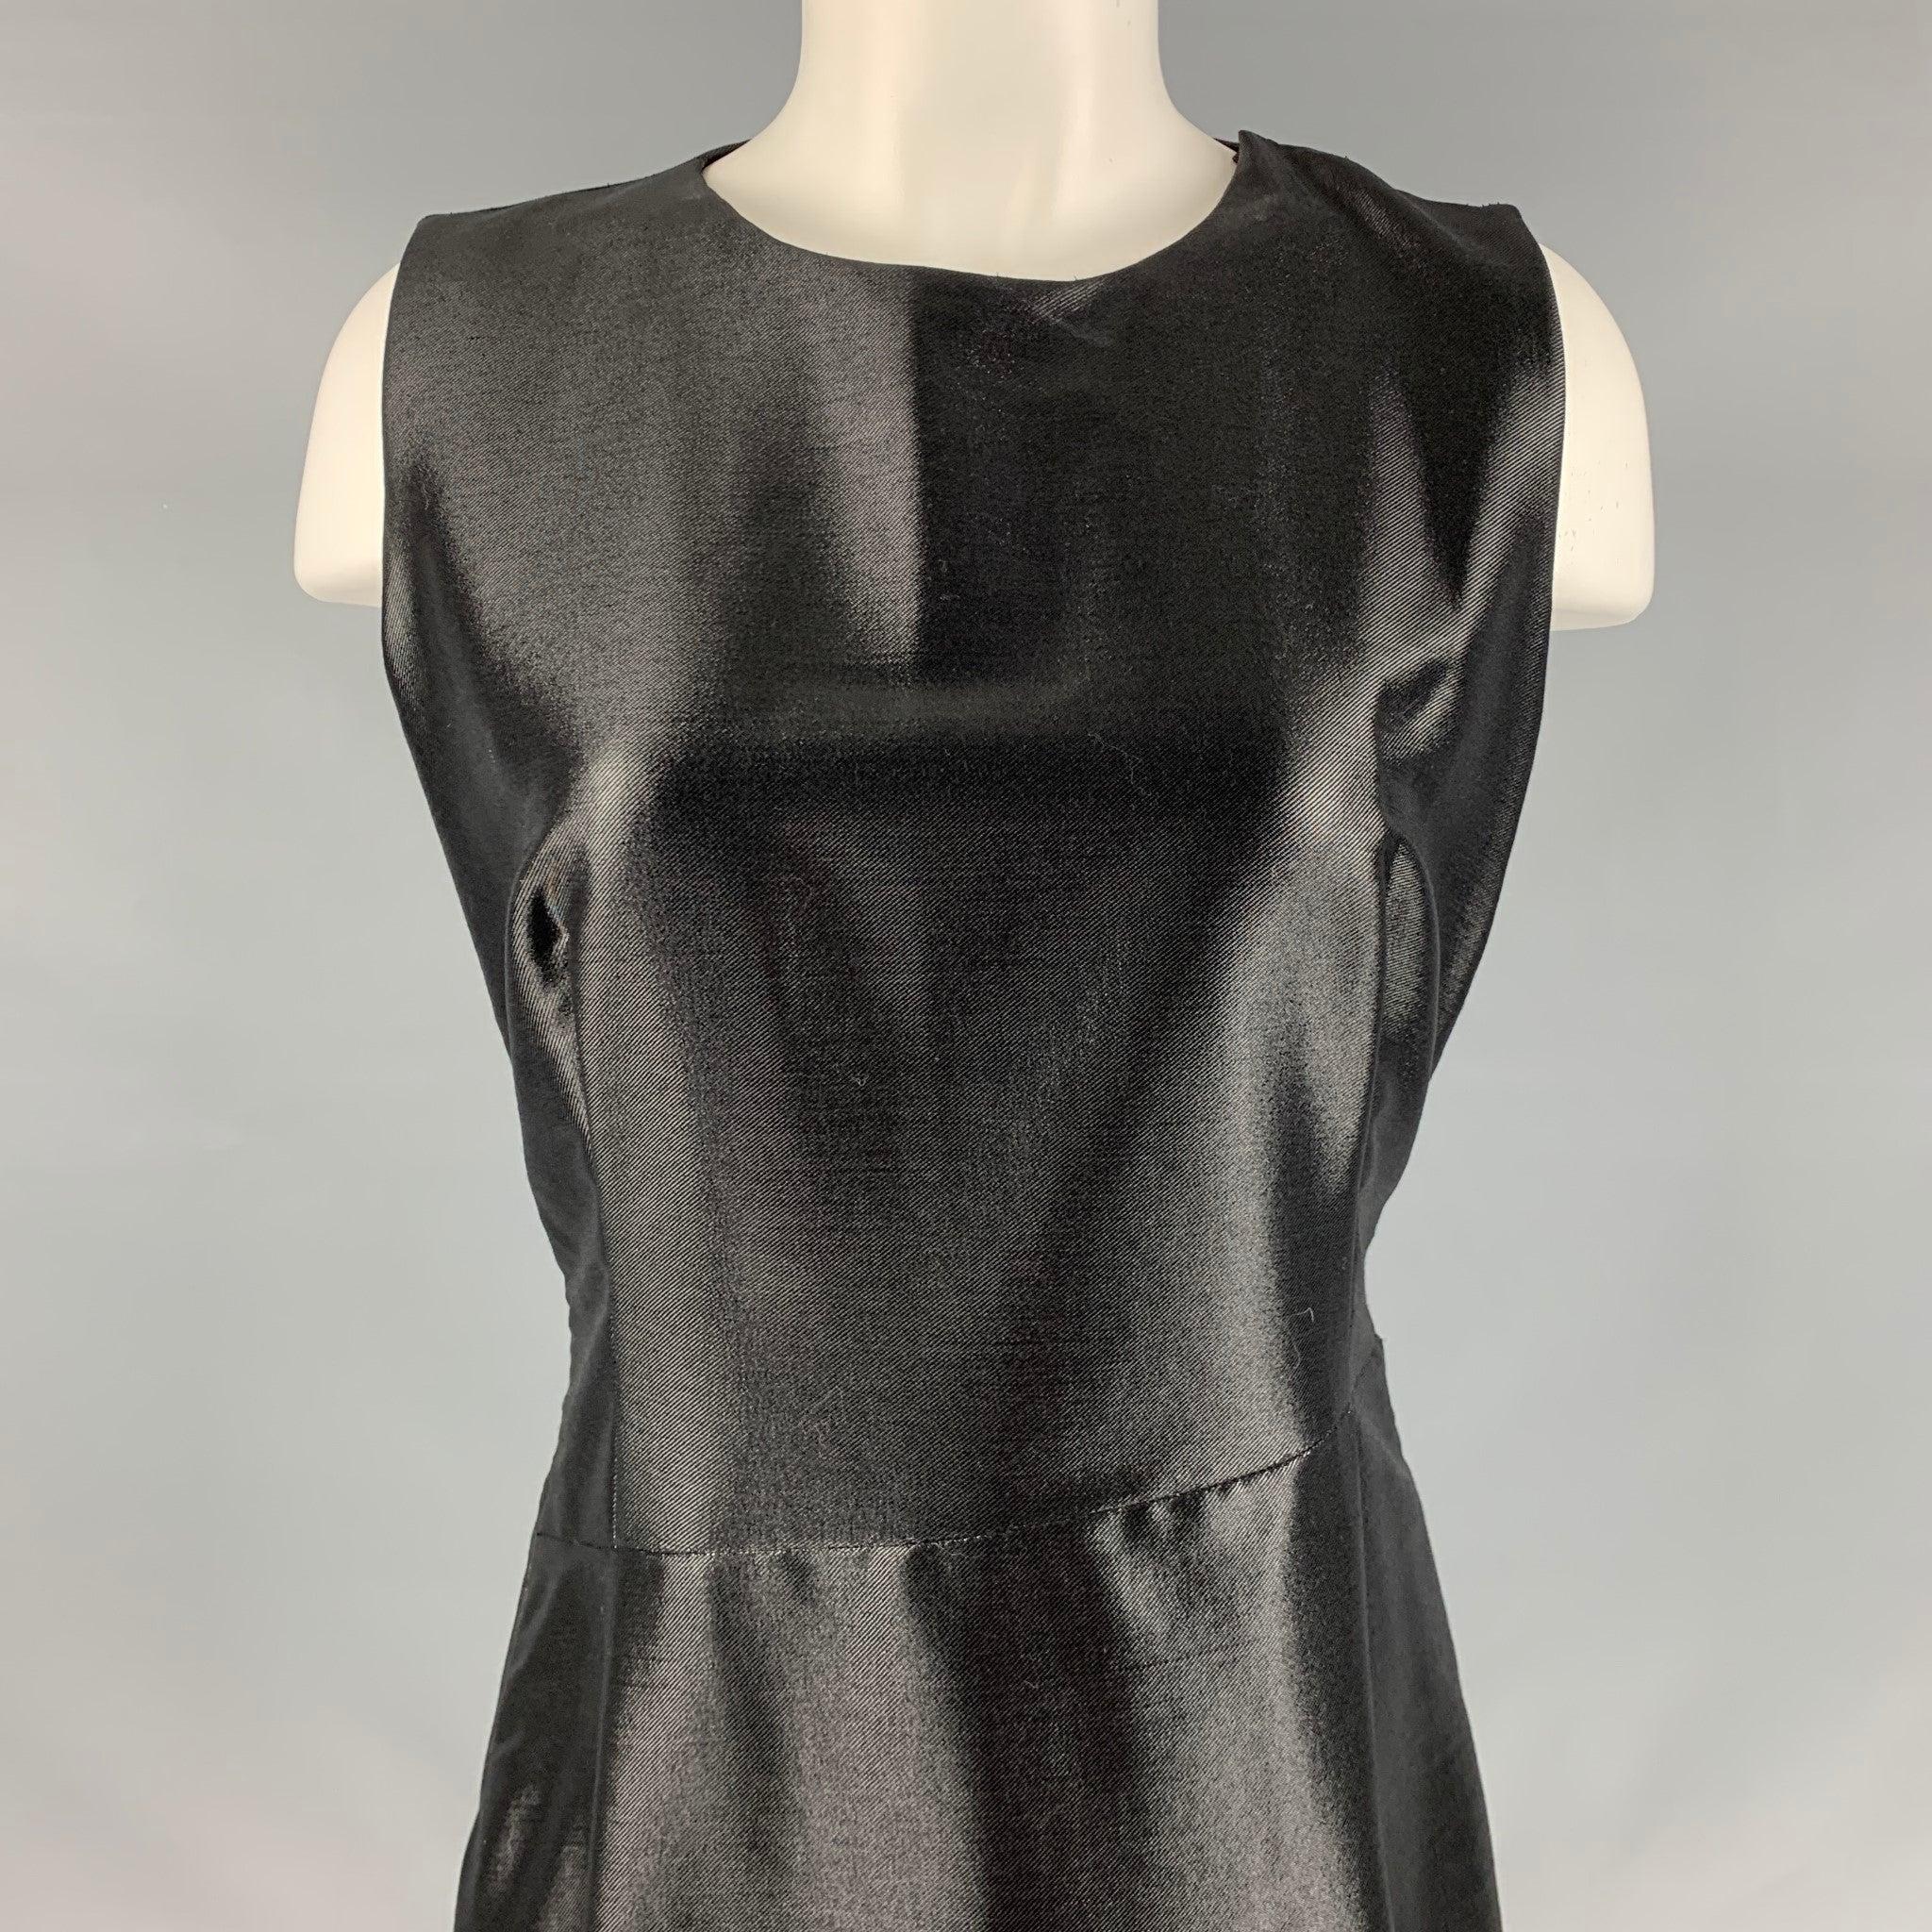 JIL SANDER dress
in a black wool and nylon blend fabric featuring a shiny style, asymmetrical drop waist, and side zipper. Made in Italy.Very Good Pre-Owned Condition. Minor signs of wear. 

Marked:  size not marked. 

Measurements: 
 
Shoulder: 14